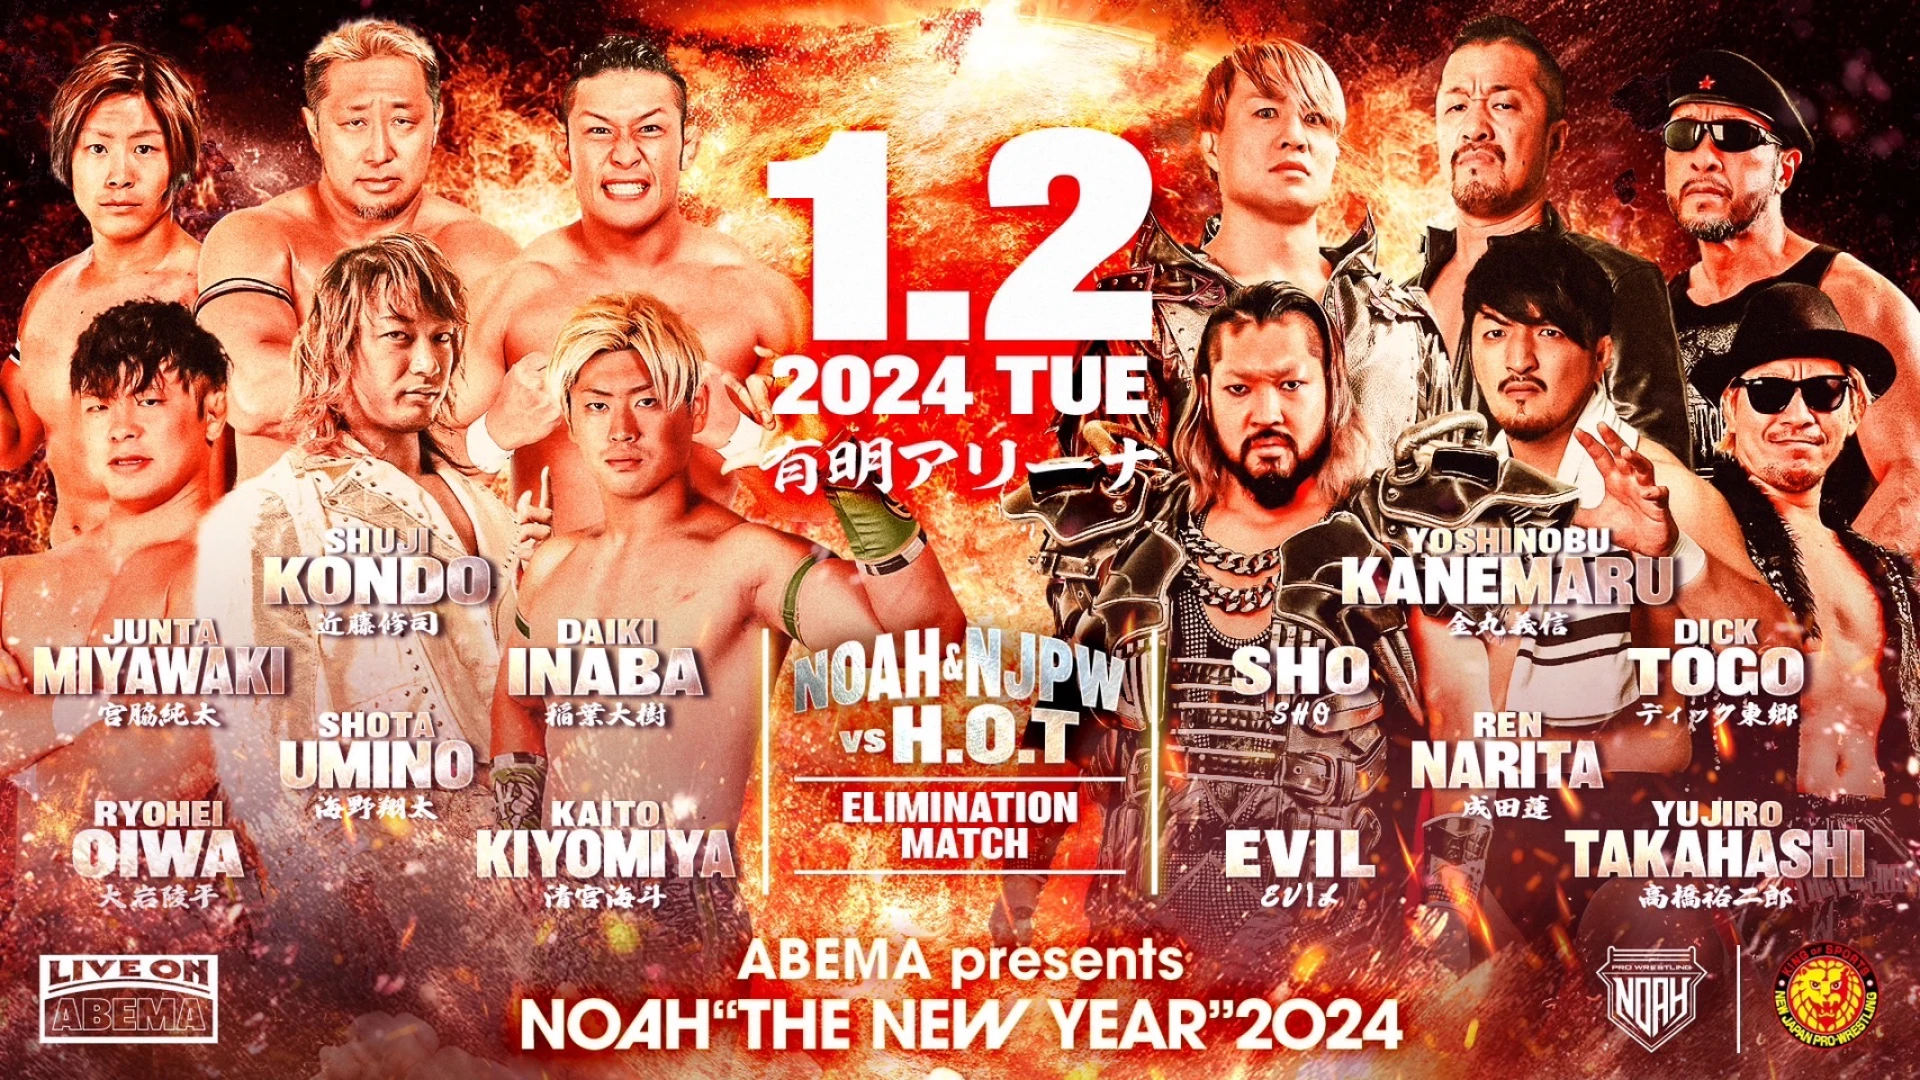 Huge Match Change Made To Pro Wrestling NOAH’s NOAH “THE NEW YEAR” 2024 Show